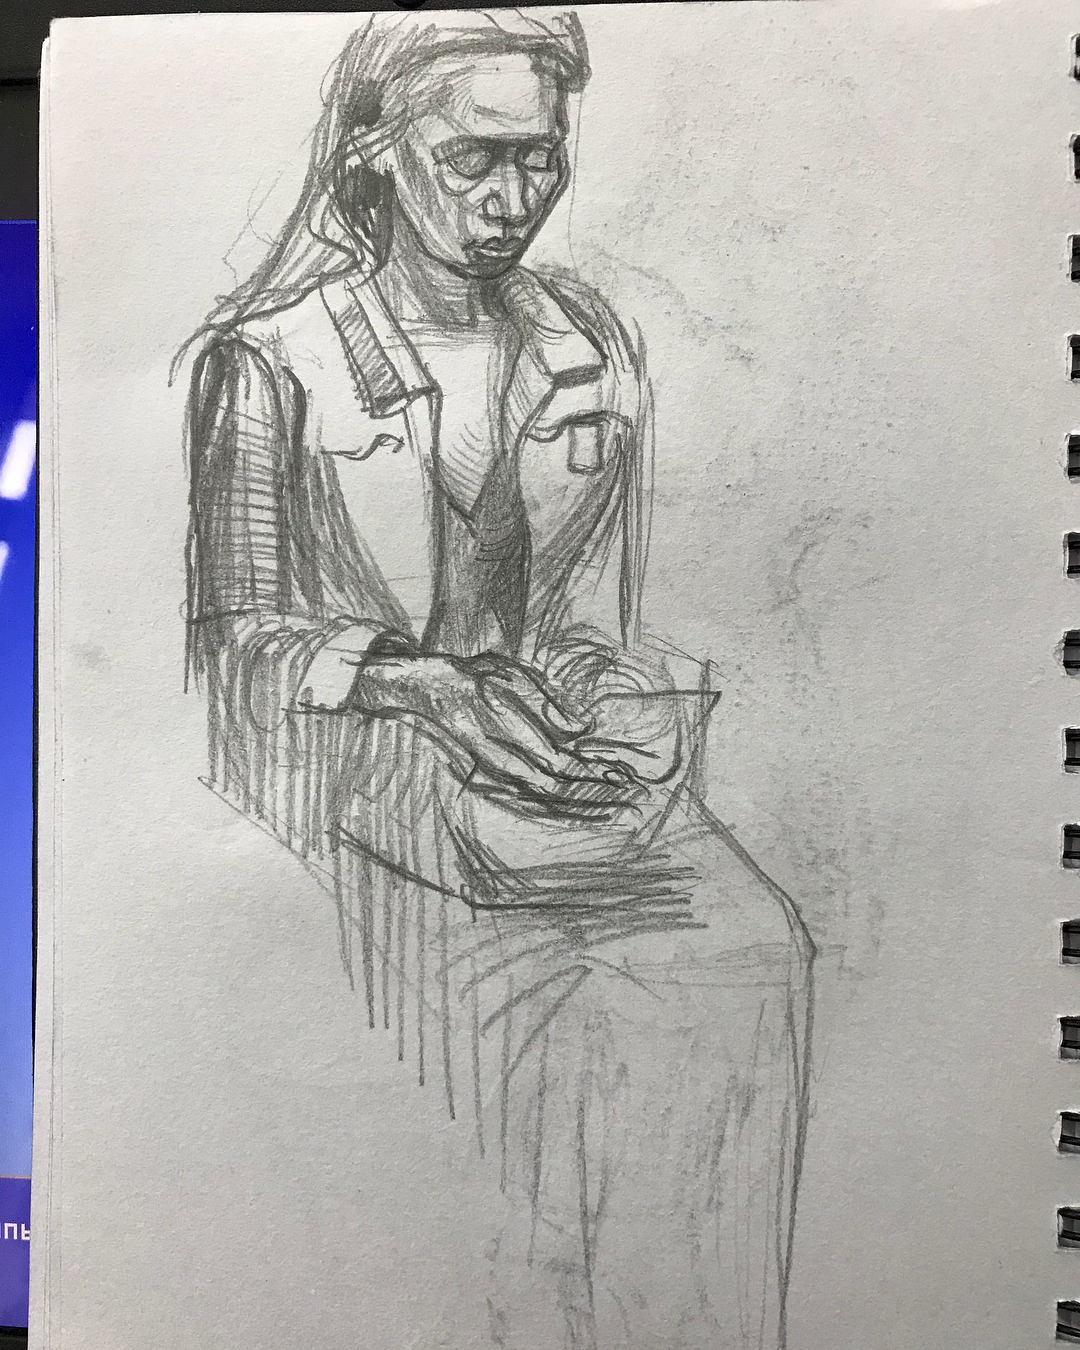 Sketches in the Moscow metro. - My, Sketch, Sketch, Sketch, Fetishism, beauty, Pencil, Metro, Longpost